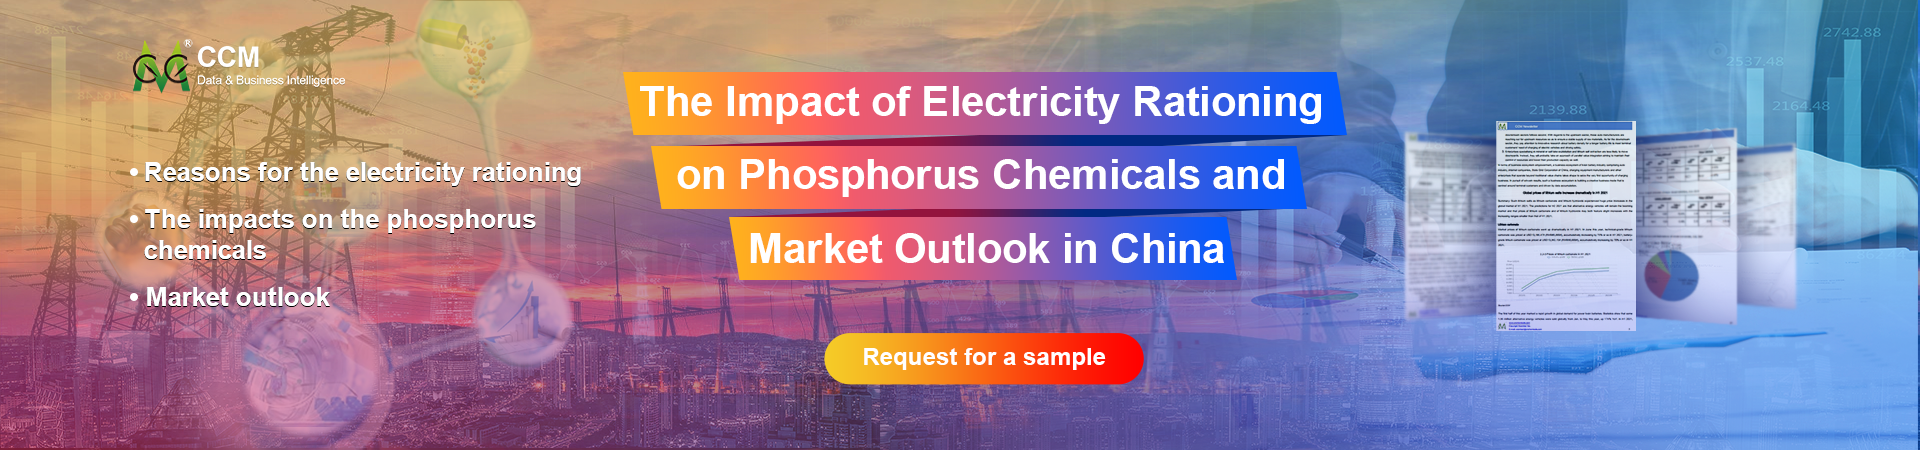 The Impact of Electricity Rationing on Phosphorus Chemicals